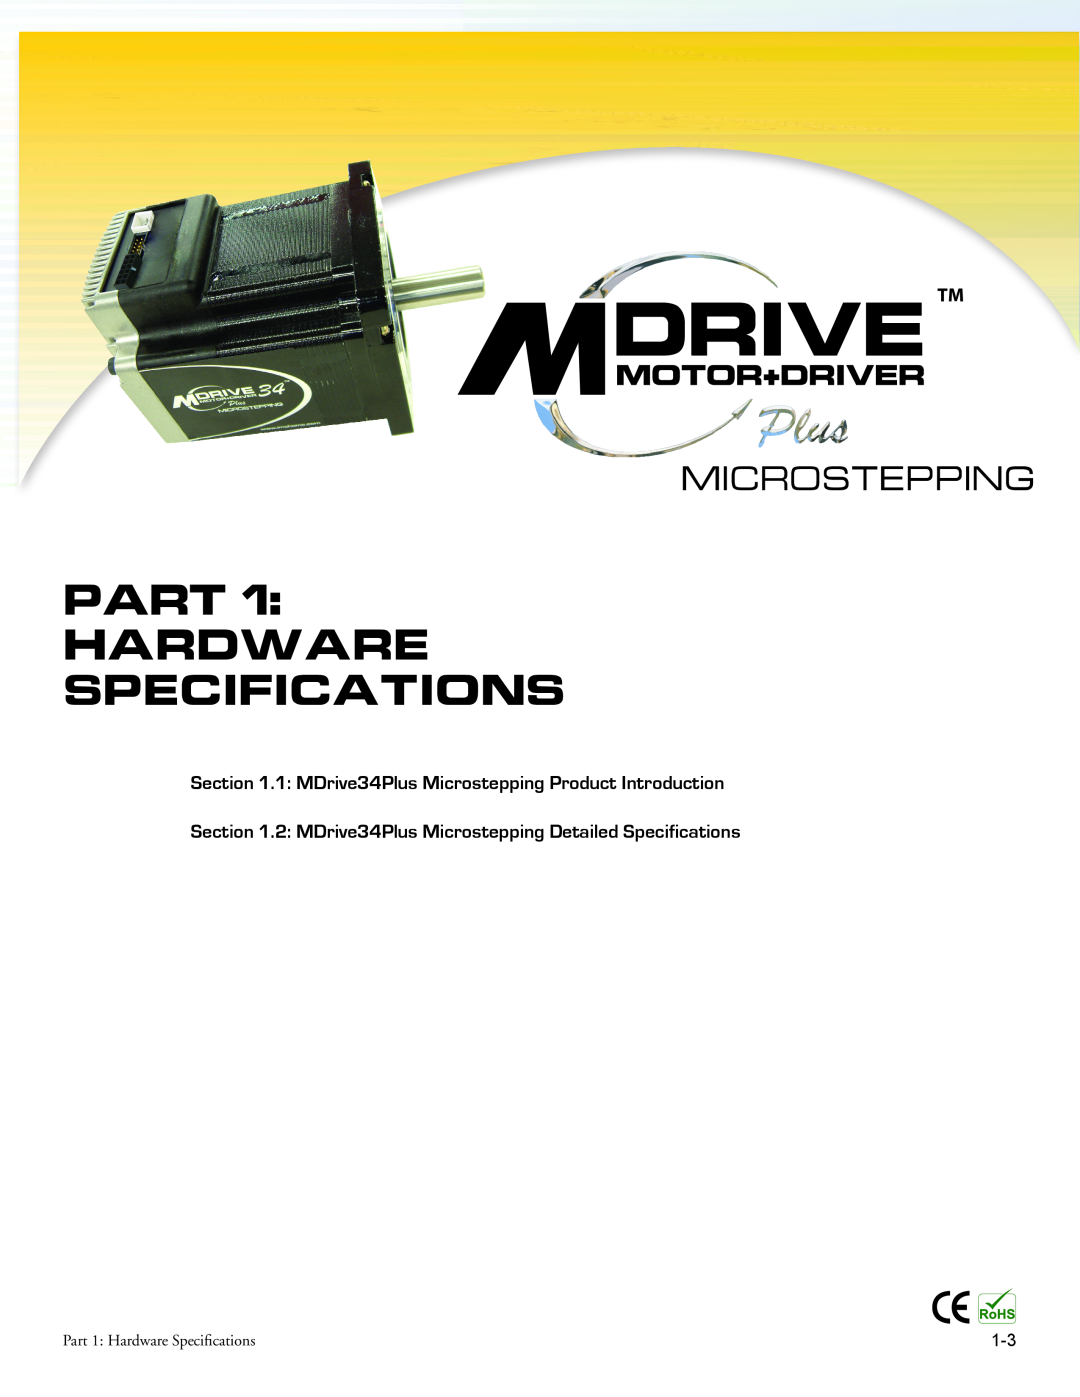 Intelligent Motion Systems MDrive34Plus manual Part Hardware Specifications, Microstepping 